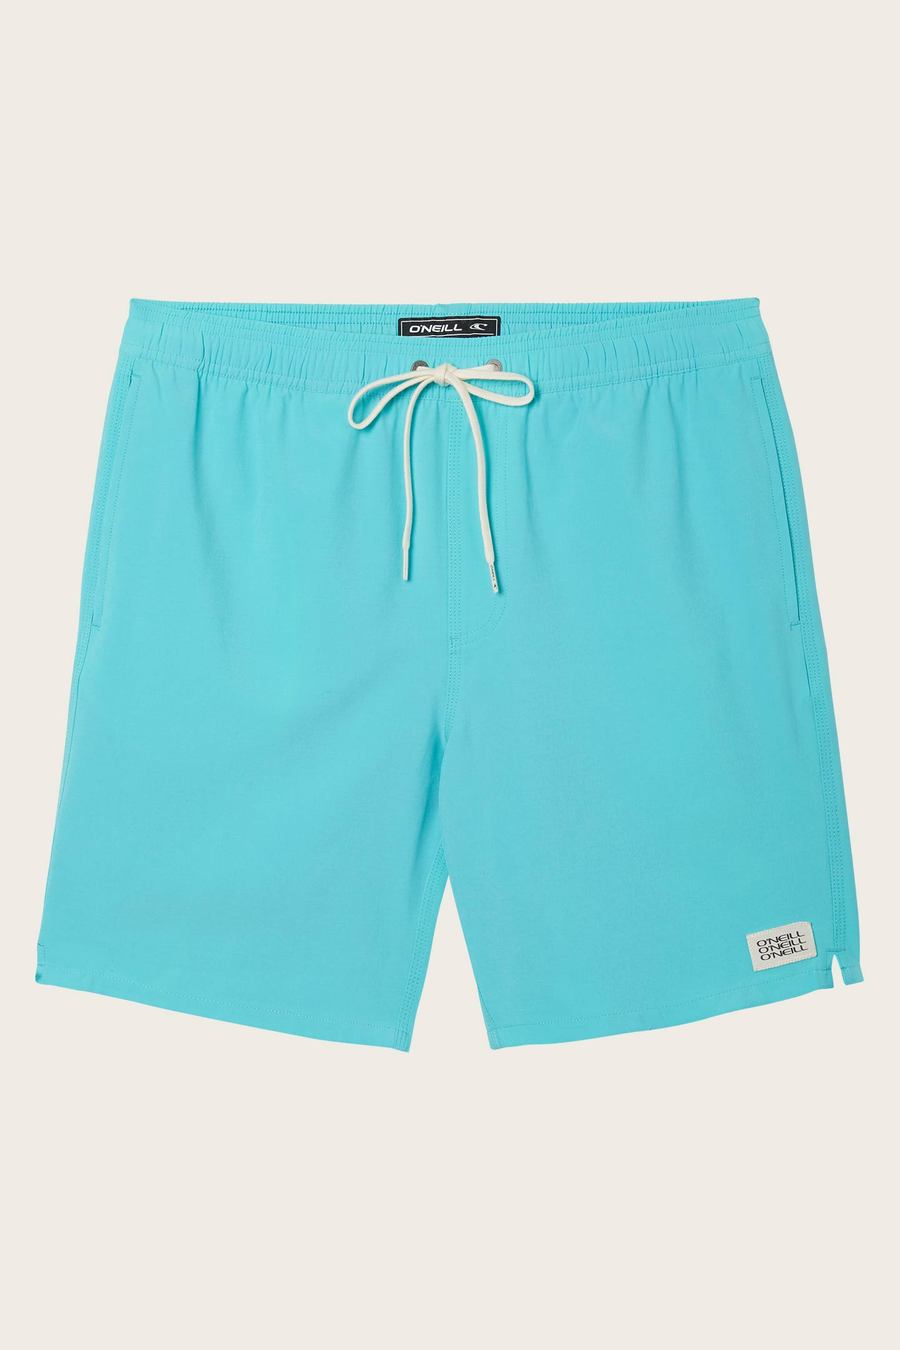 Oneill Solid Volley - Turq Mens Shorts